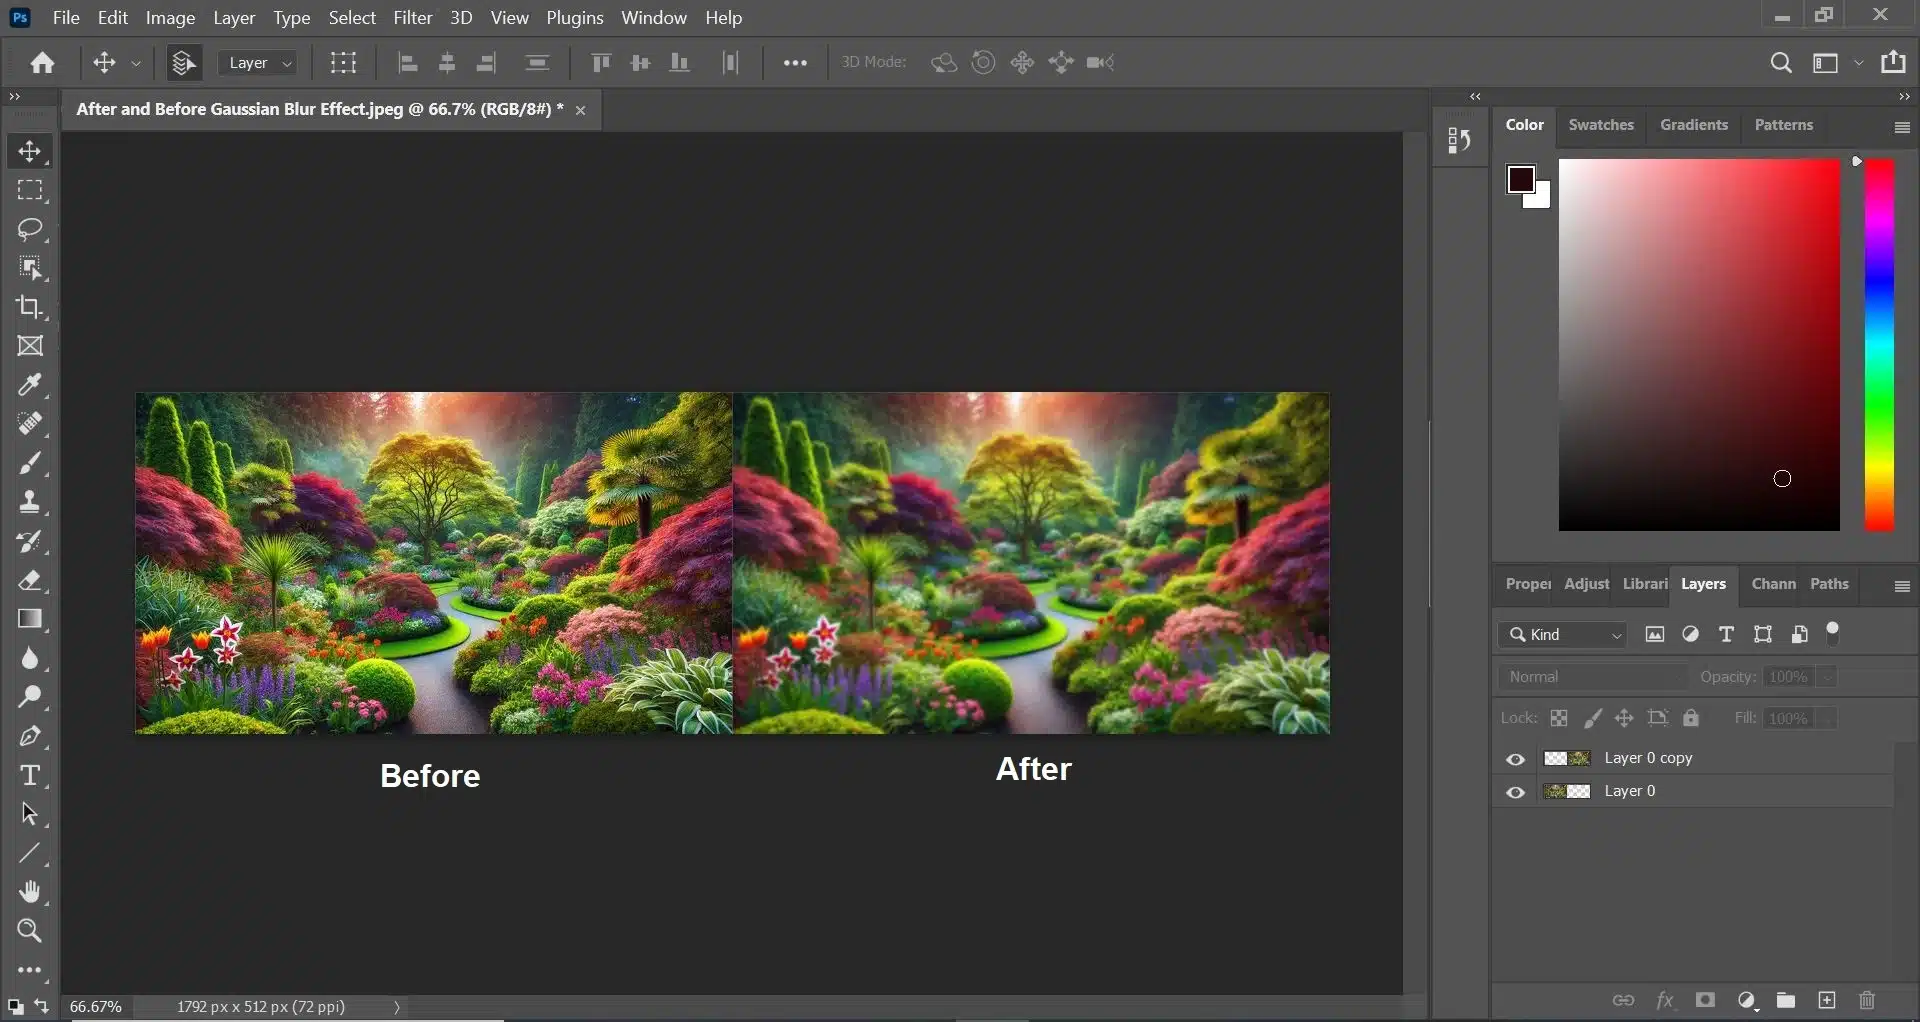 Adobe Photoshop interface displaying a before and after comparison of a garden image with the Gaussian Blur effect applied. The 'before' image on the left is clear, while the 'after' image on the right is blurred.